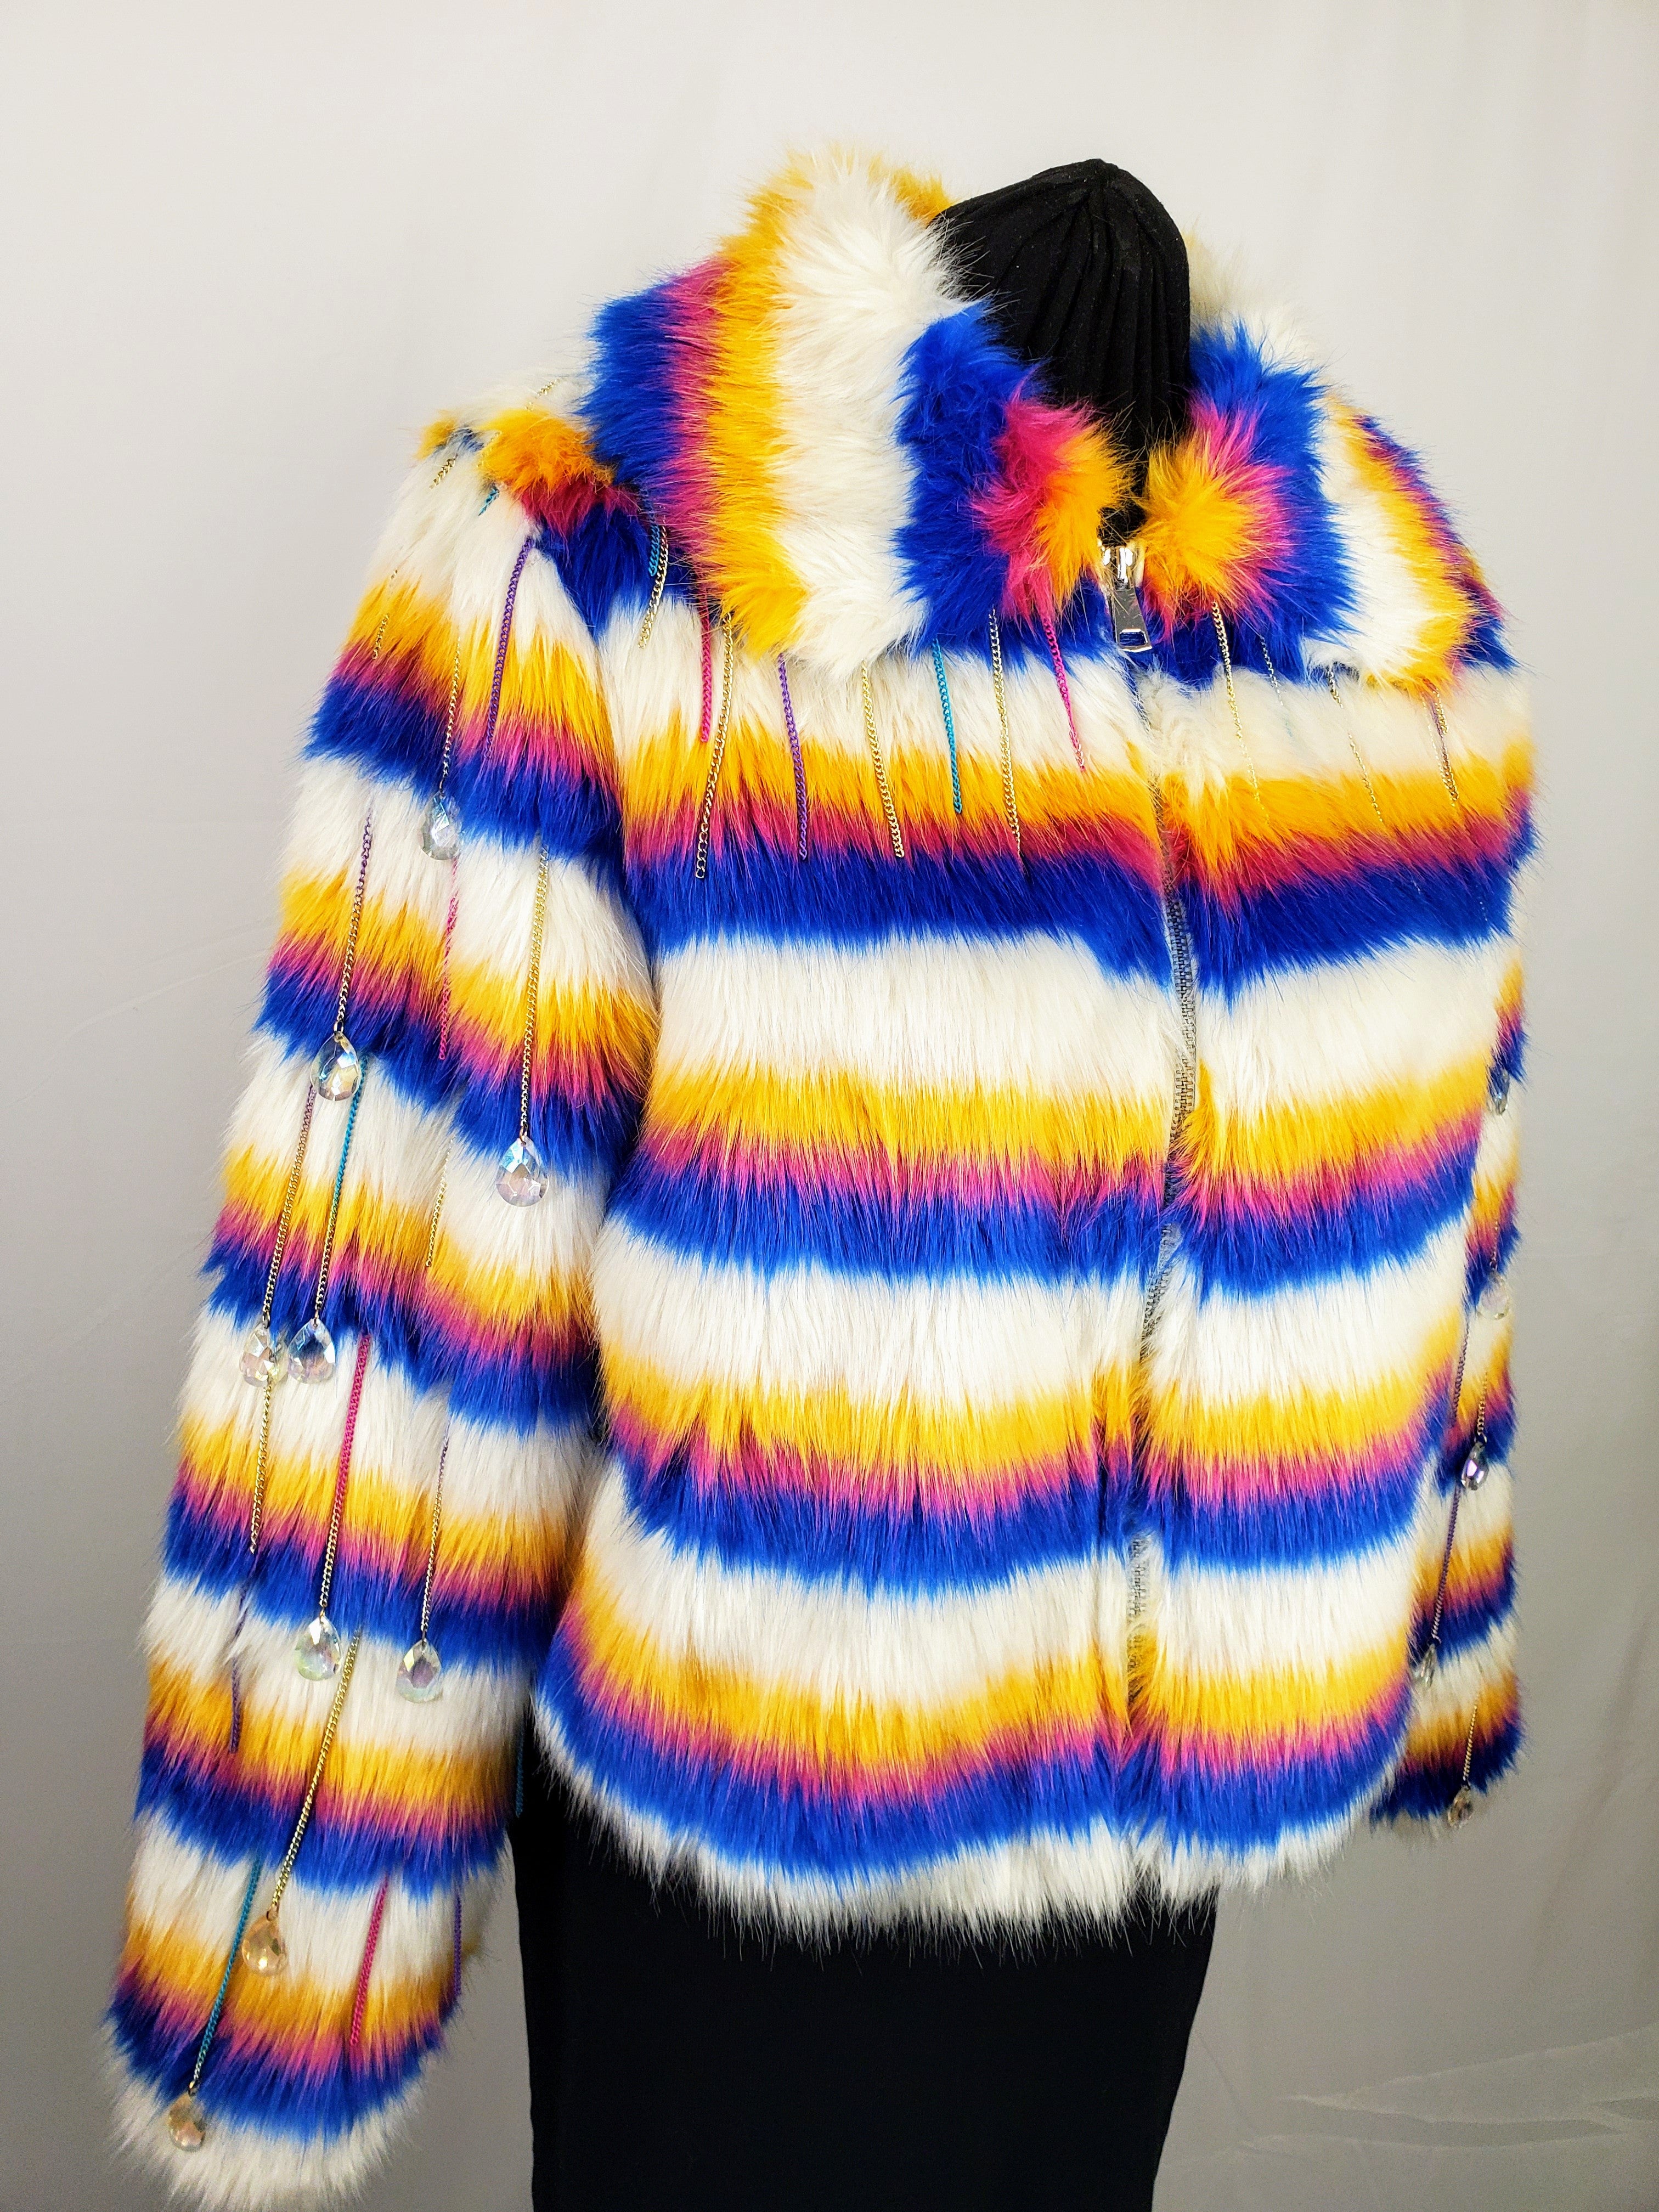 colorful fake fur coat with beaded sleeves closed side view on dressform